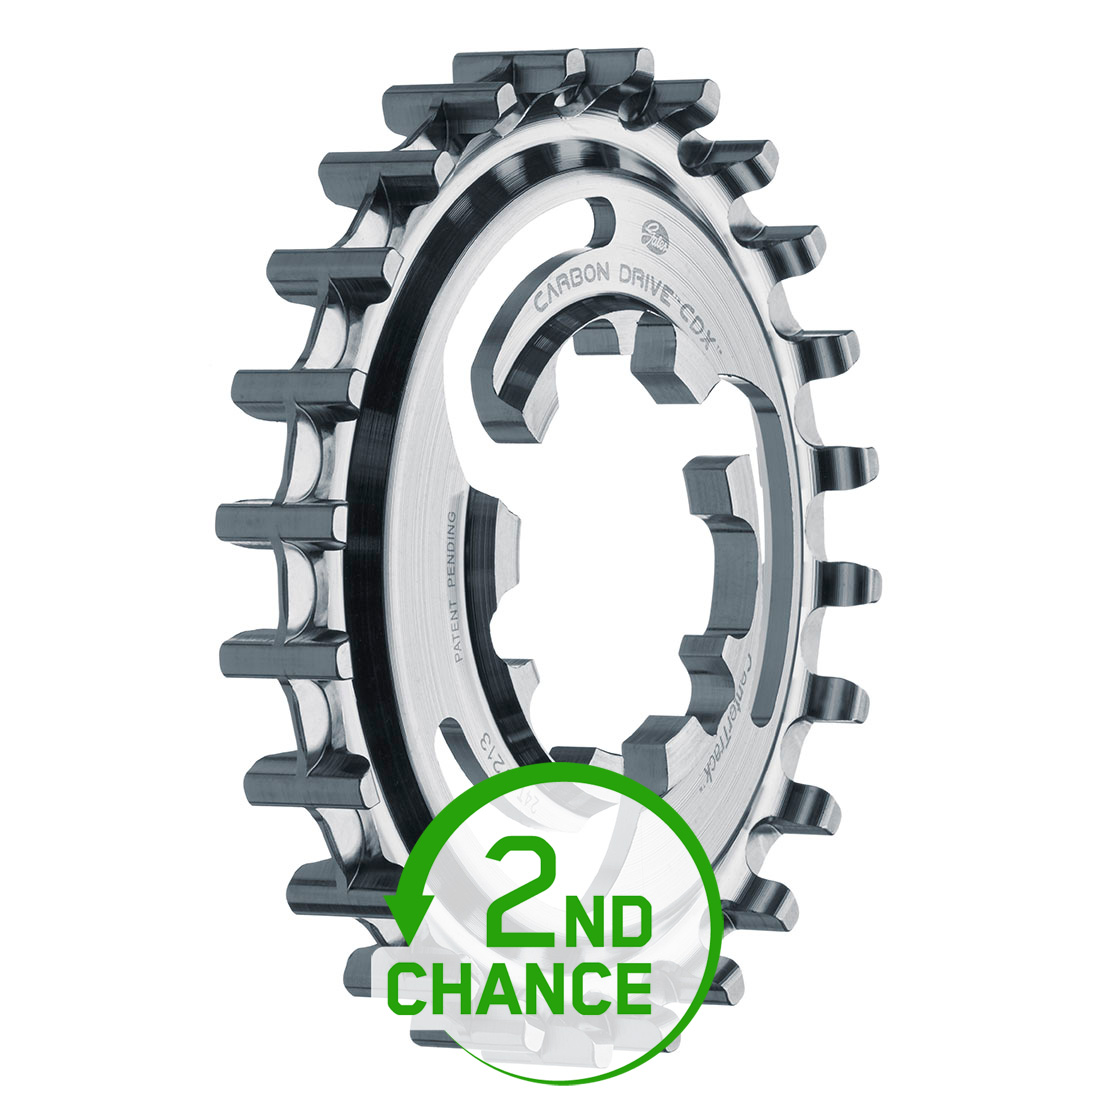 Picture of Gates Carbon Drive CDX Centertrack Sprocket - Rear | Enviolo - stainless steel - 2nd Choice